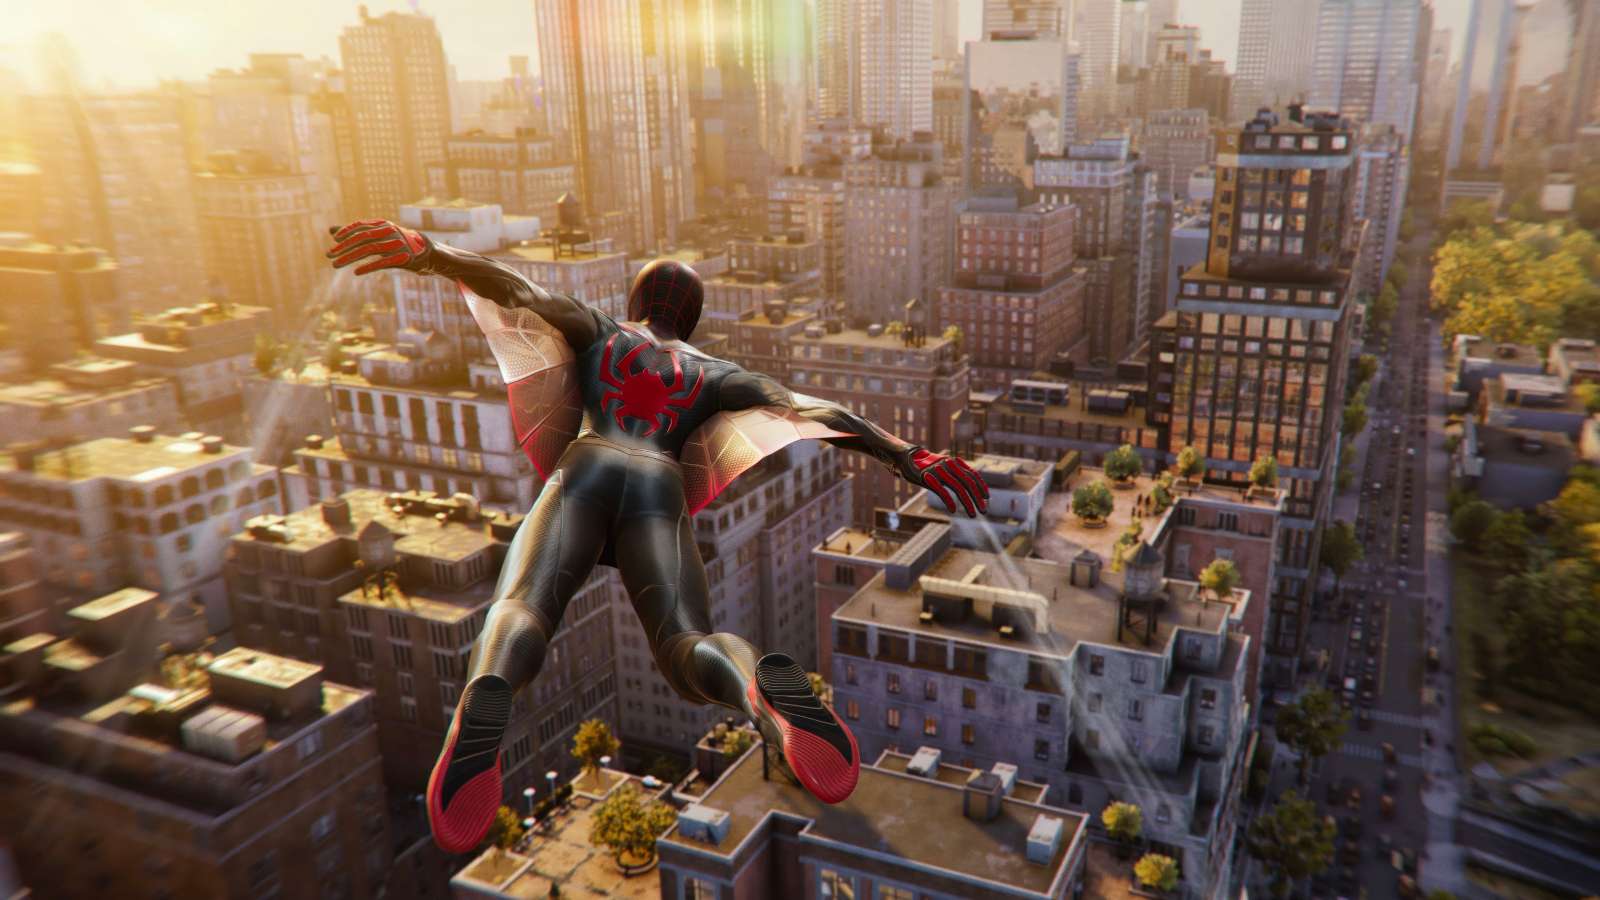 Miles Morales Spider-Man soaring through NY with his web wings